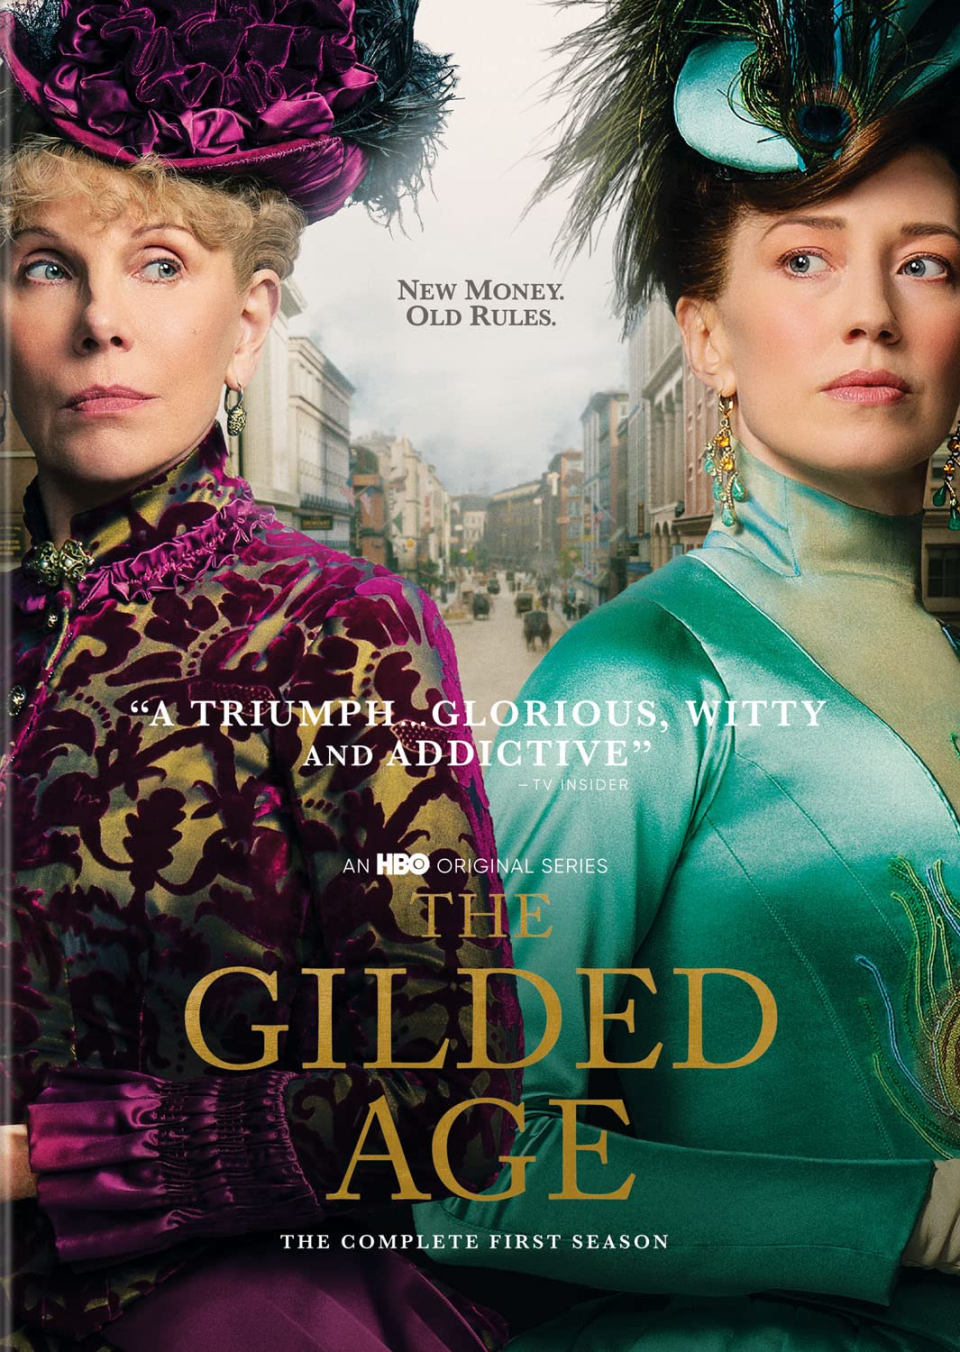 'The Gilded Age' on HBO: Watch It Online, Pricing, Availability & More